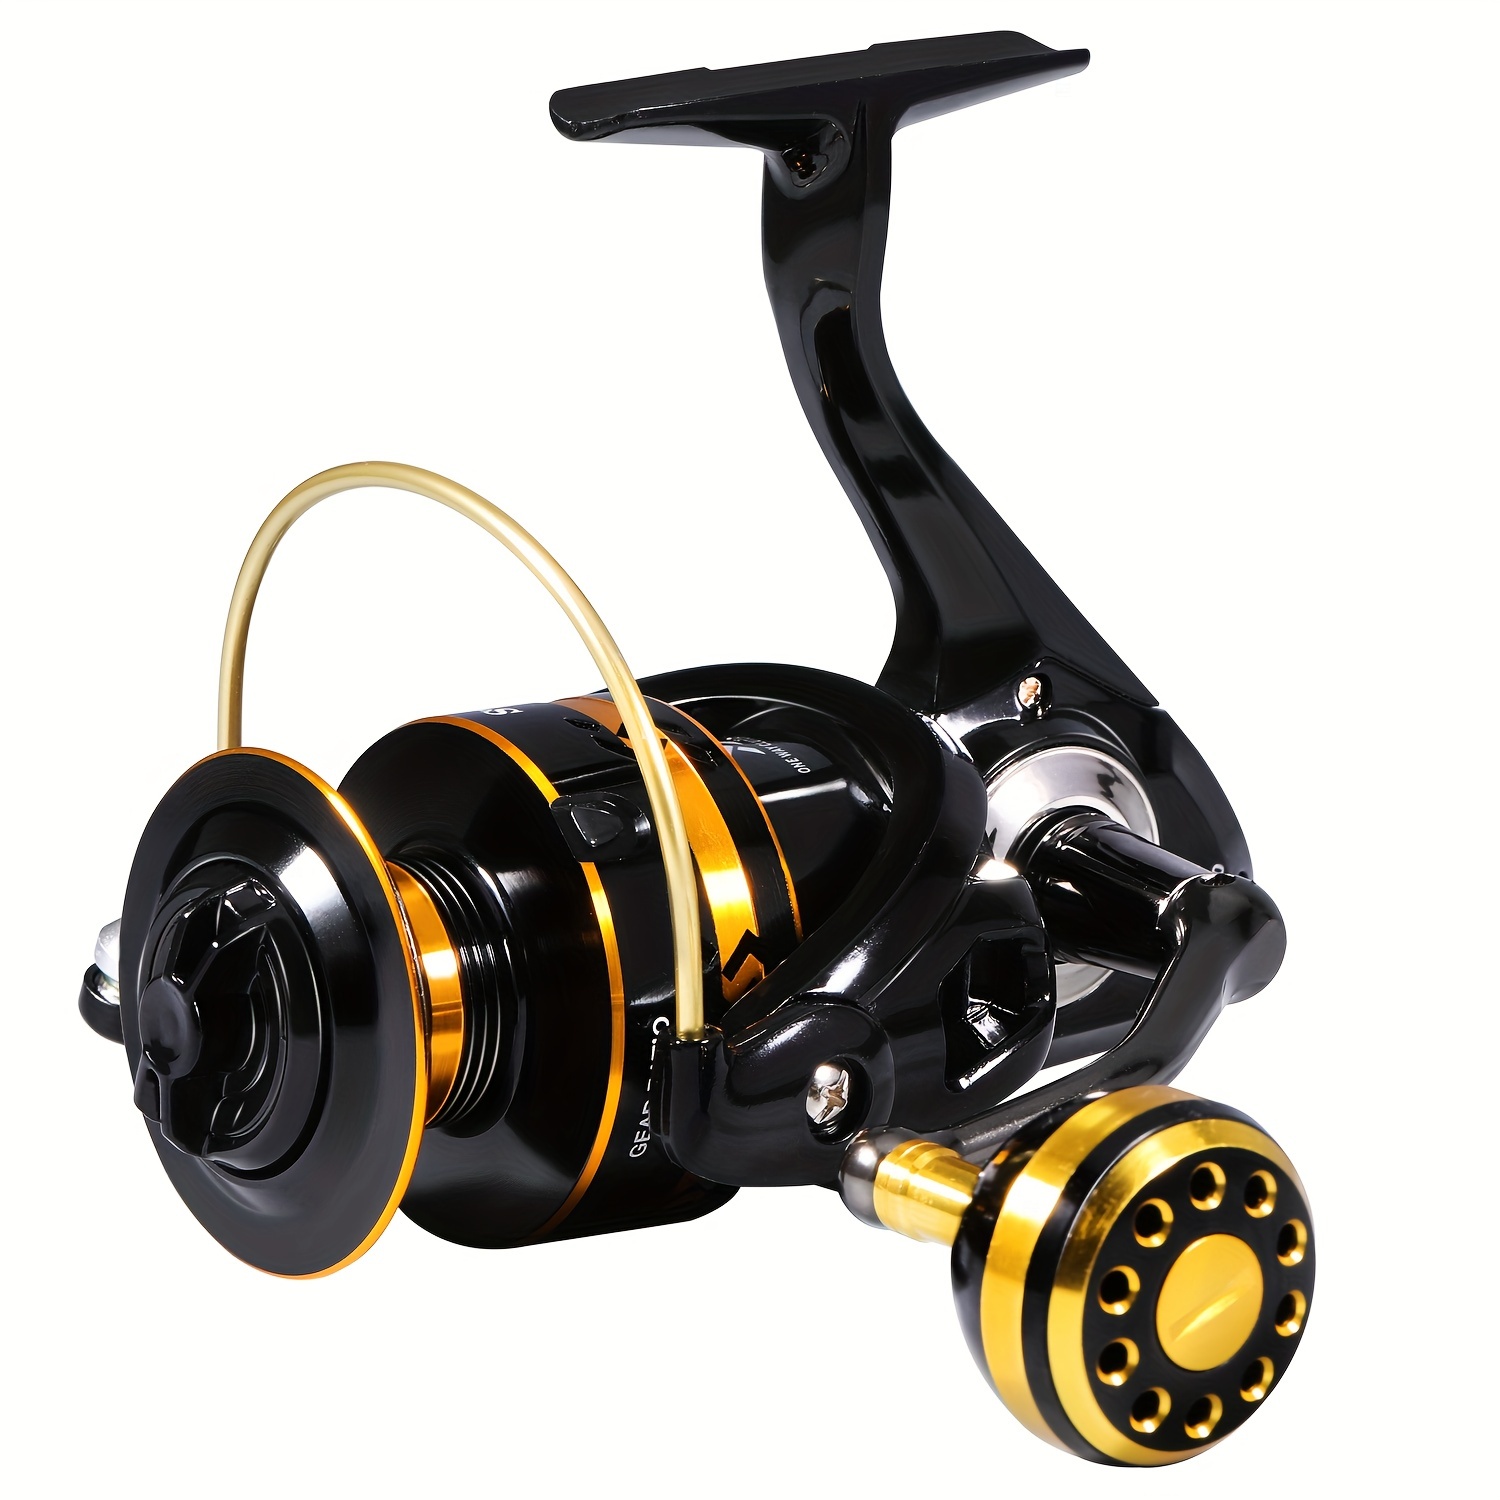  Sougayilang Spinning Fishing Reel,12+1BB Metal Body Smooth,  Carp Spinning Reels, for Saltwater and Freshwater Fishing-BE5000 : Sports &  Outdoors